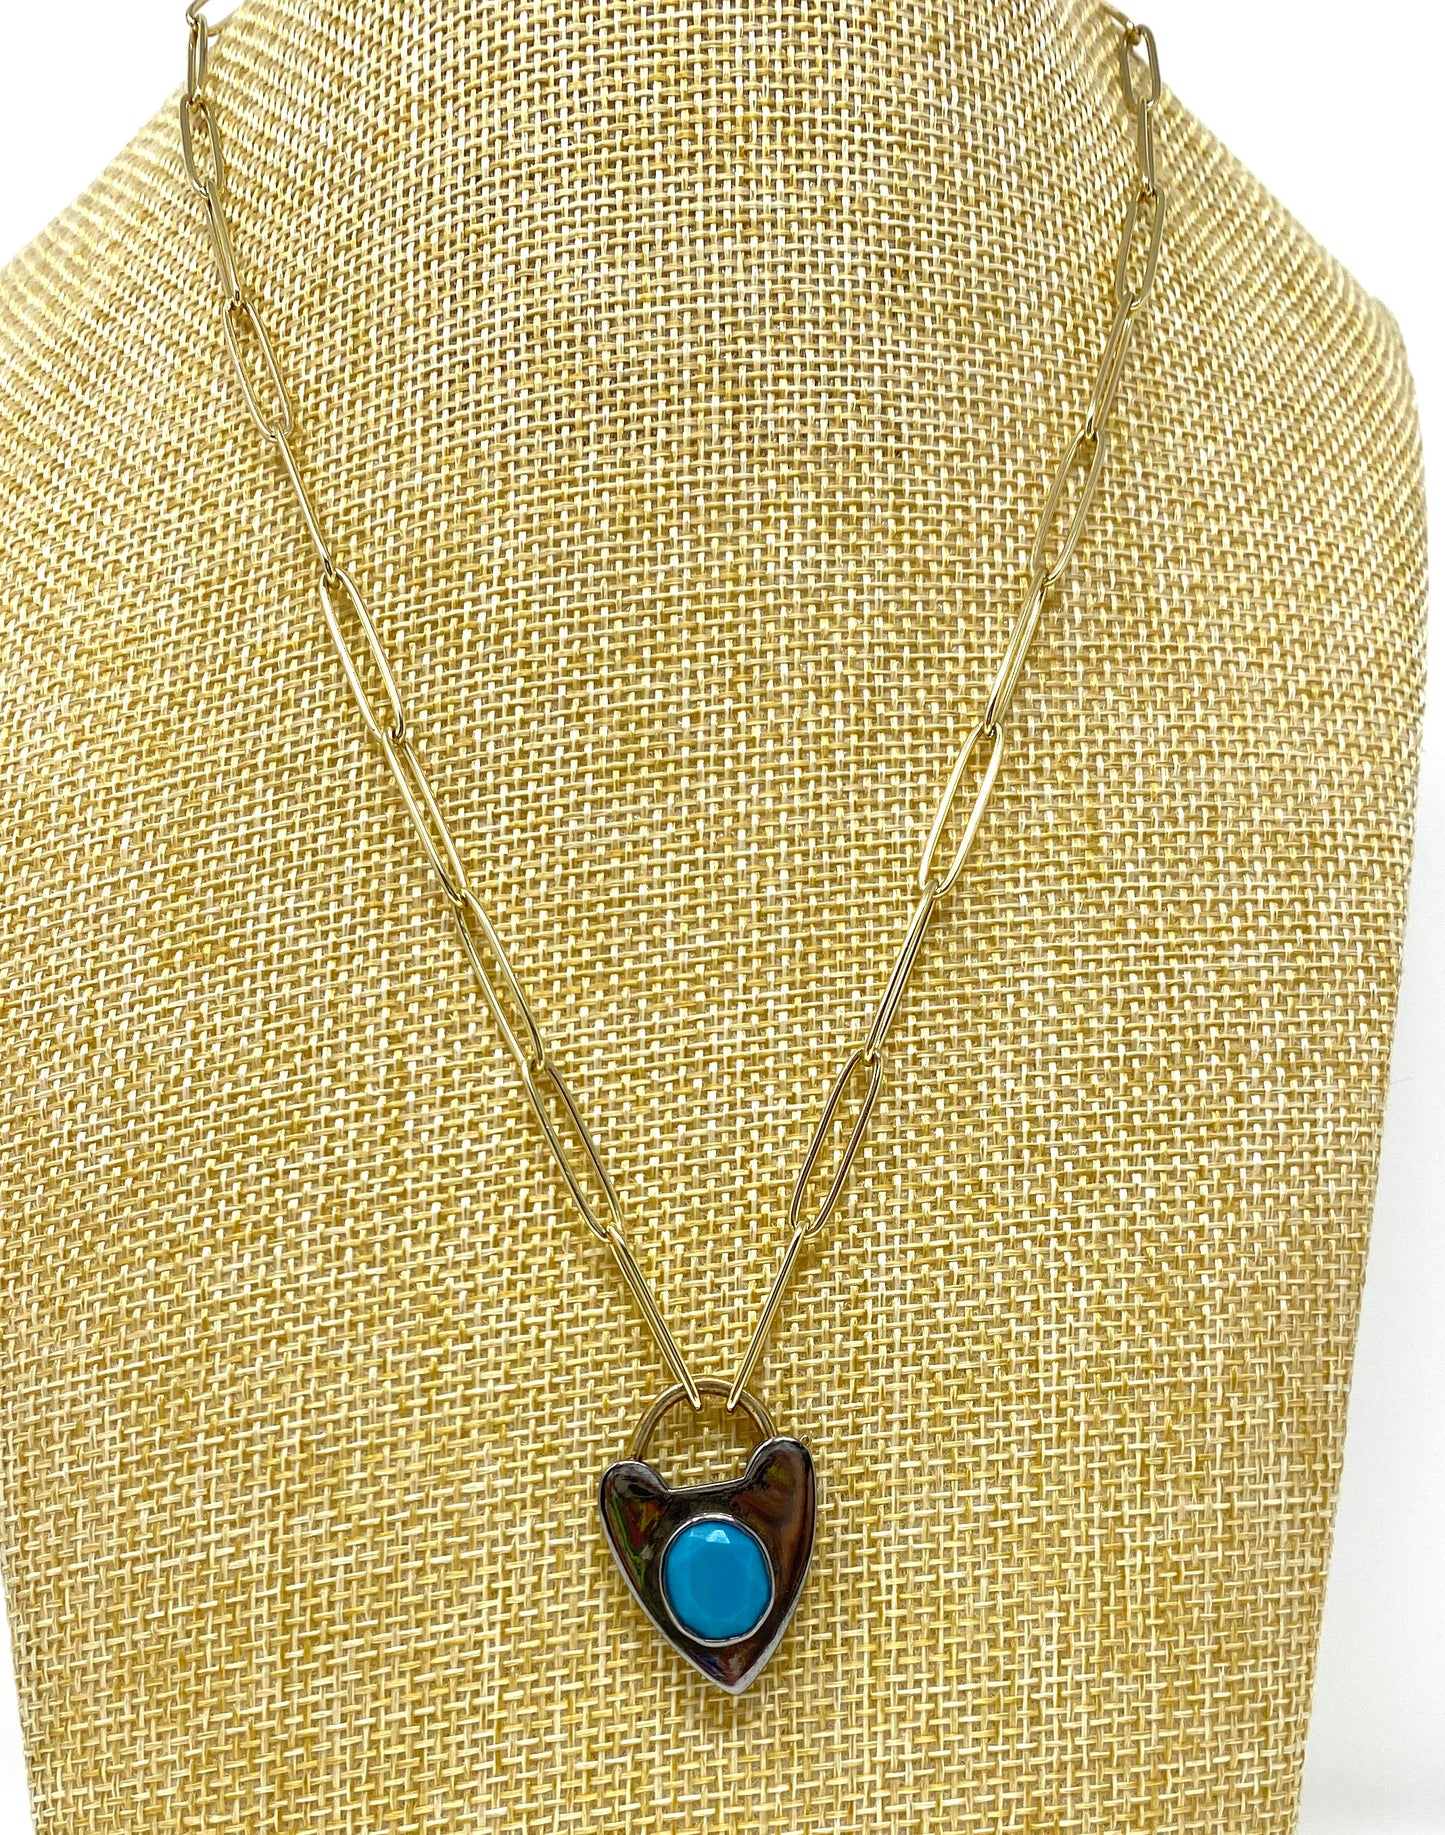 Gold Filled Paperclip Necklace with Oxidized Heart Lobster Clasp and Turquoise Stone